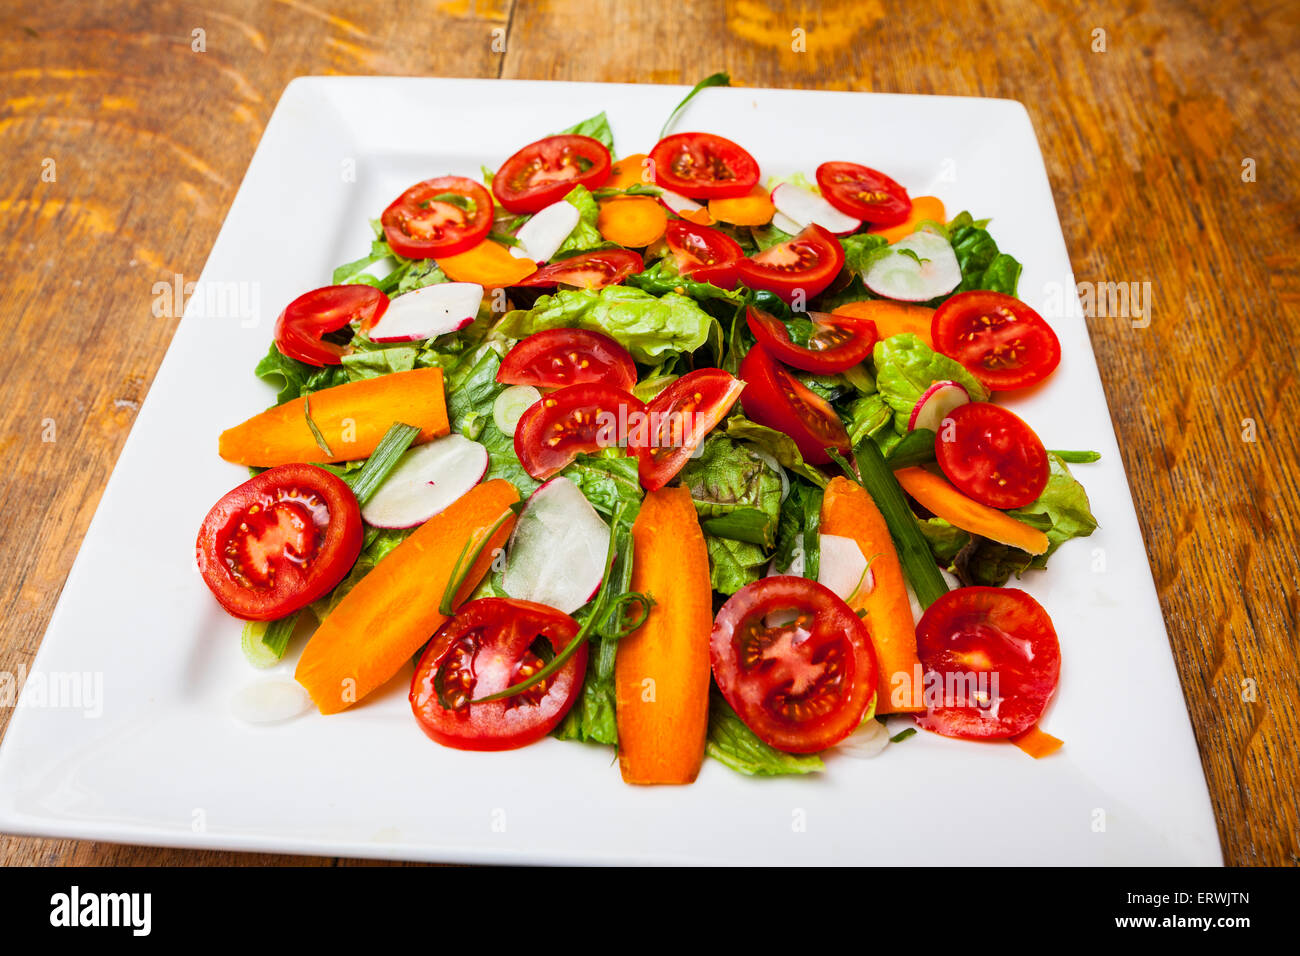 A tossed Salad with green lettuce, romaine, tomato, carrot, green onion, and radish. Stock Photo